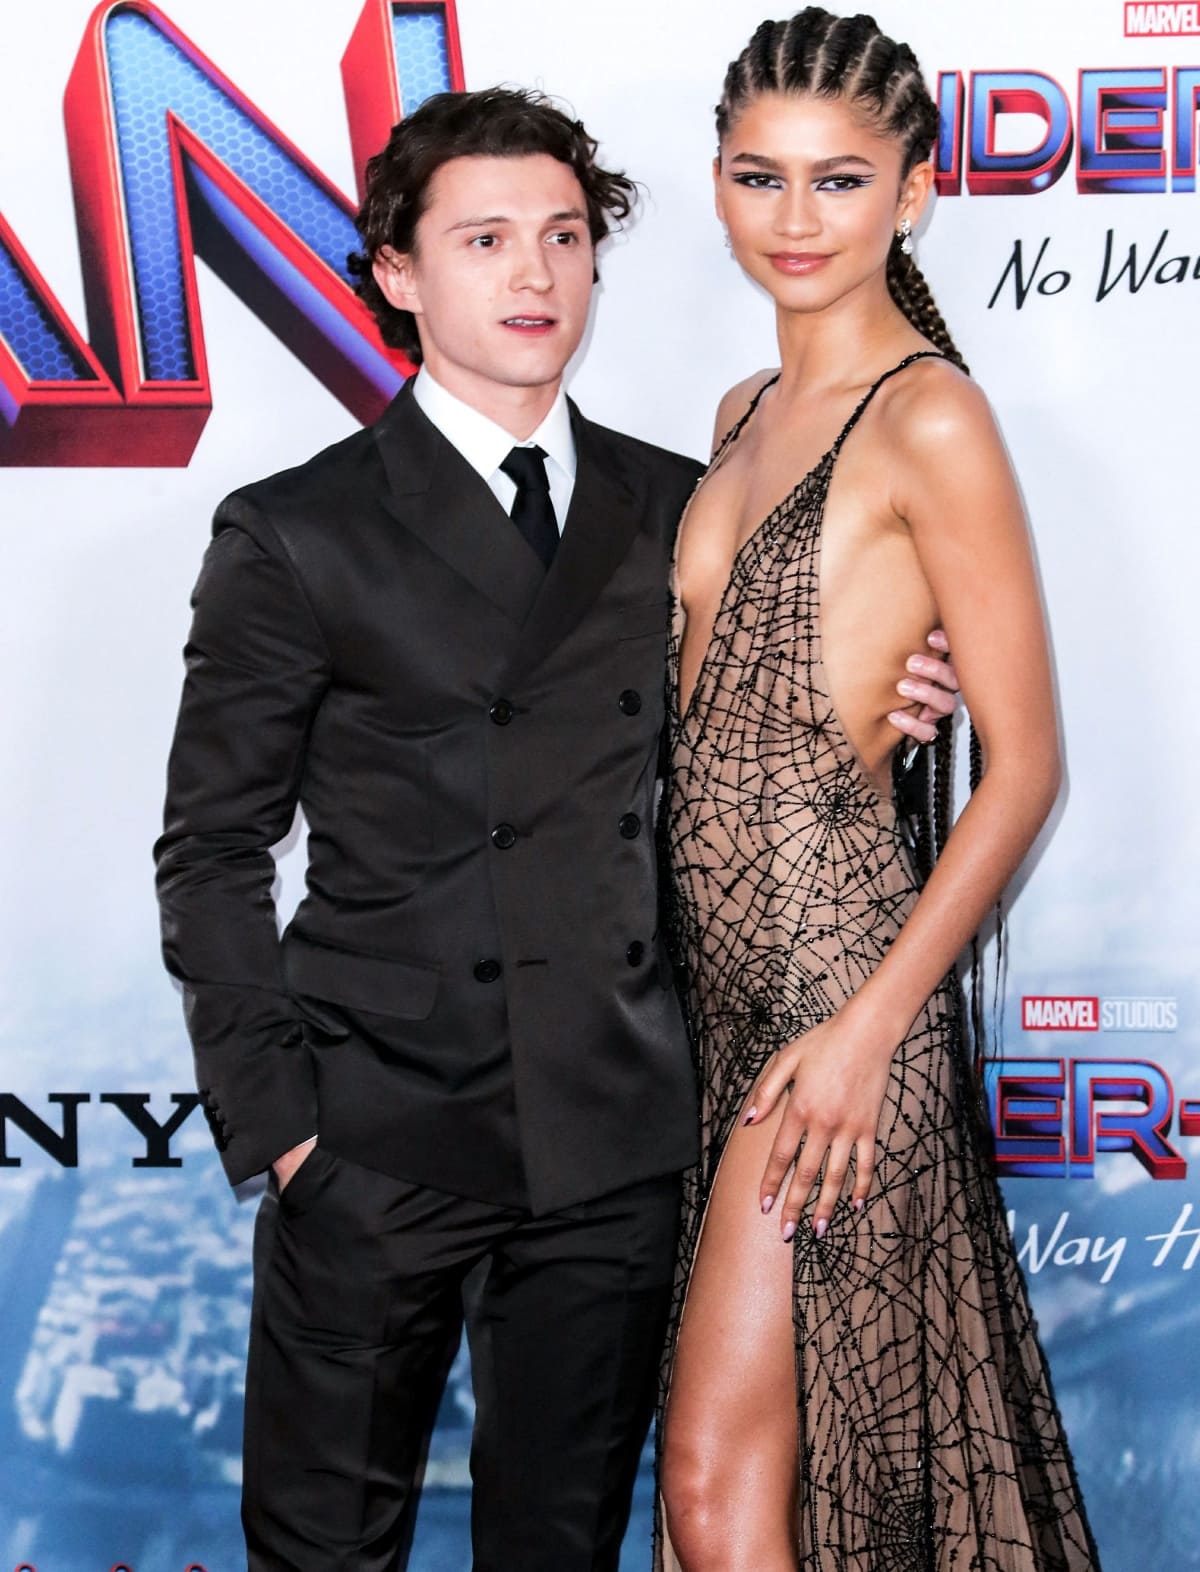 Girlfriend Zendaya towers over Tom Holland at the premiere of Spider-Man: No Way Home